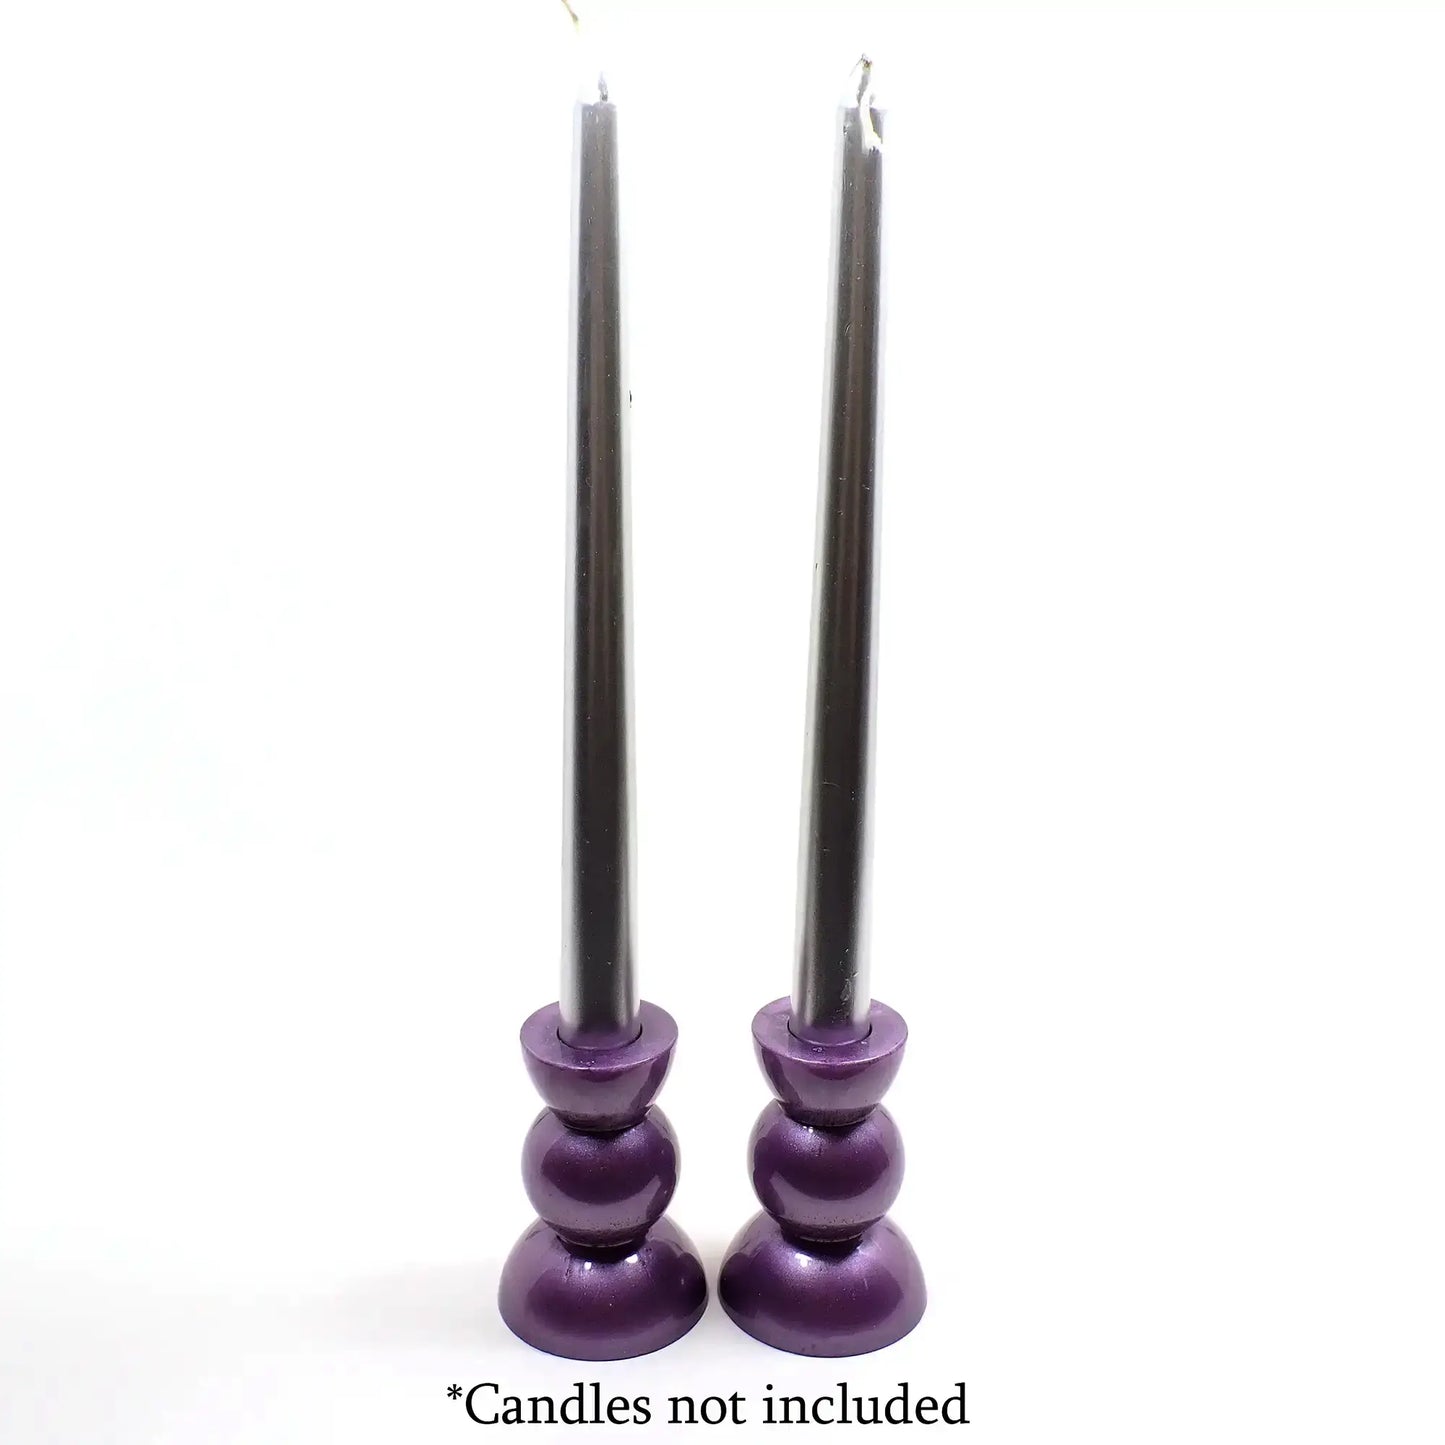 Set of Two Handmade Pearly Lilac Purple Resin Rounded Geometric Candlestick Holders